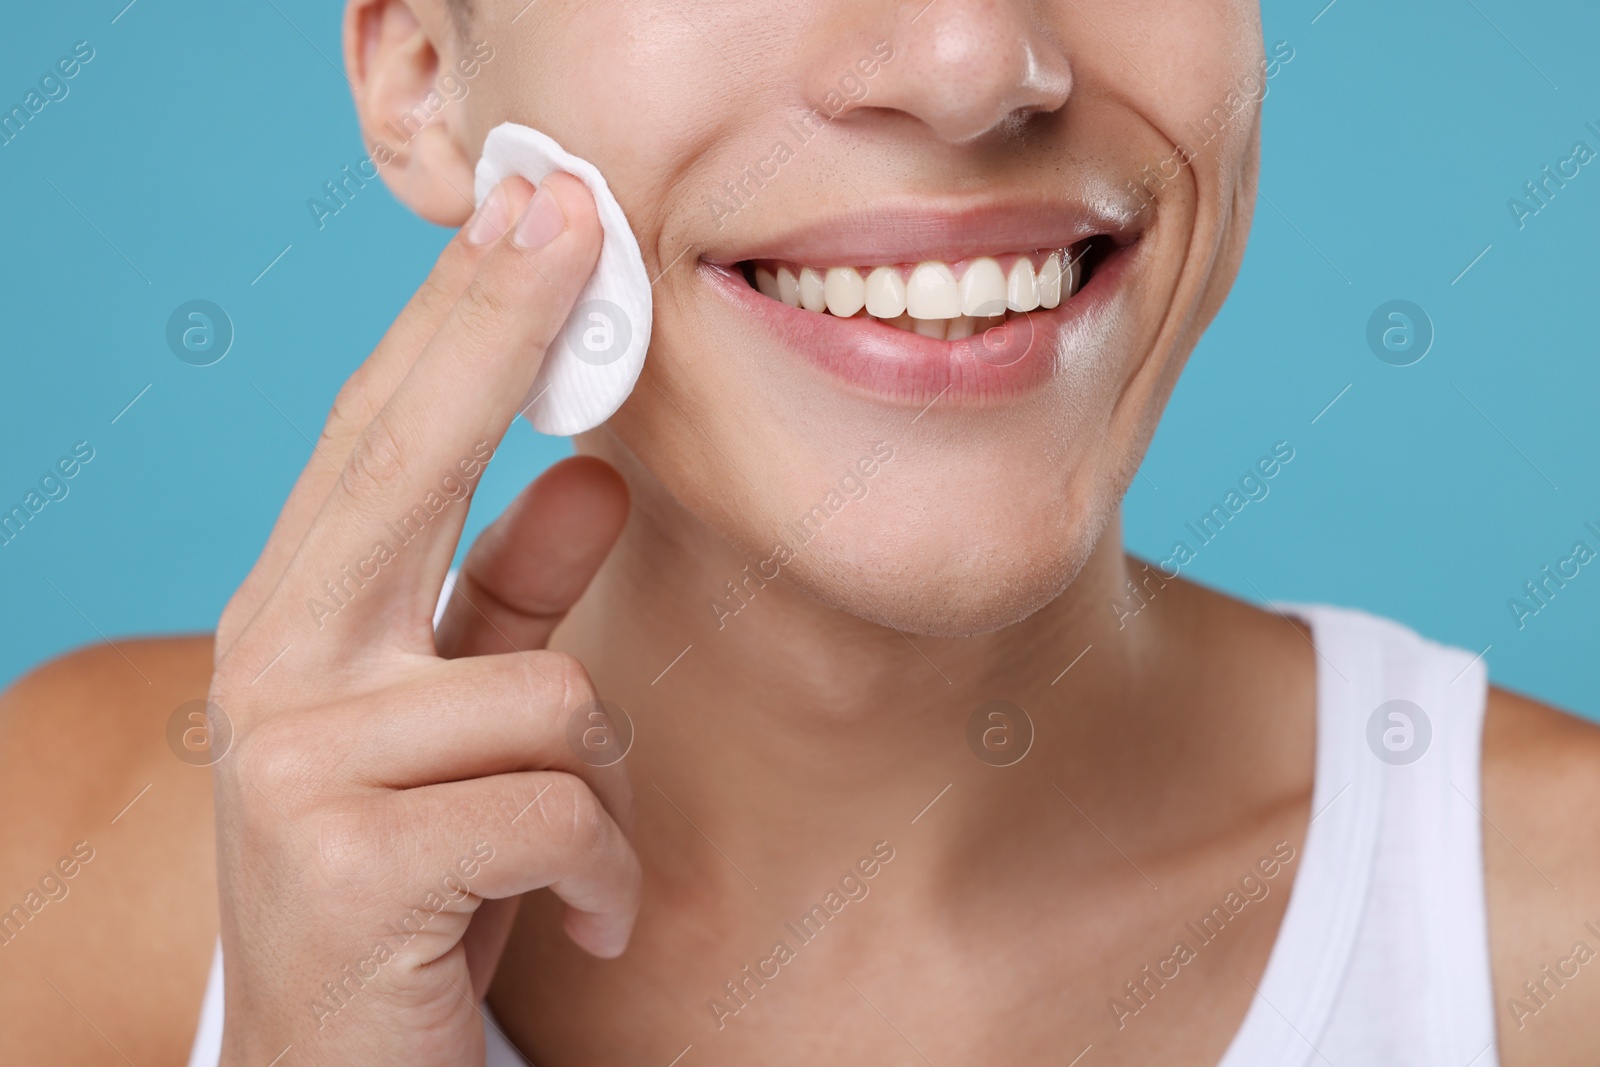 Photo of Man cleaning face with cotton pad on light blue background, closeup